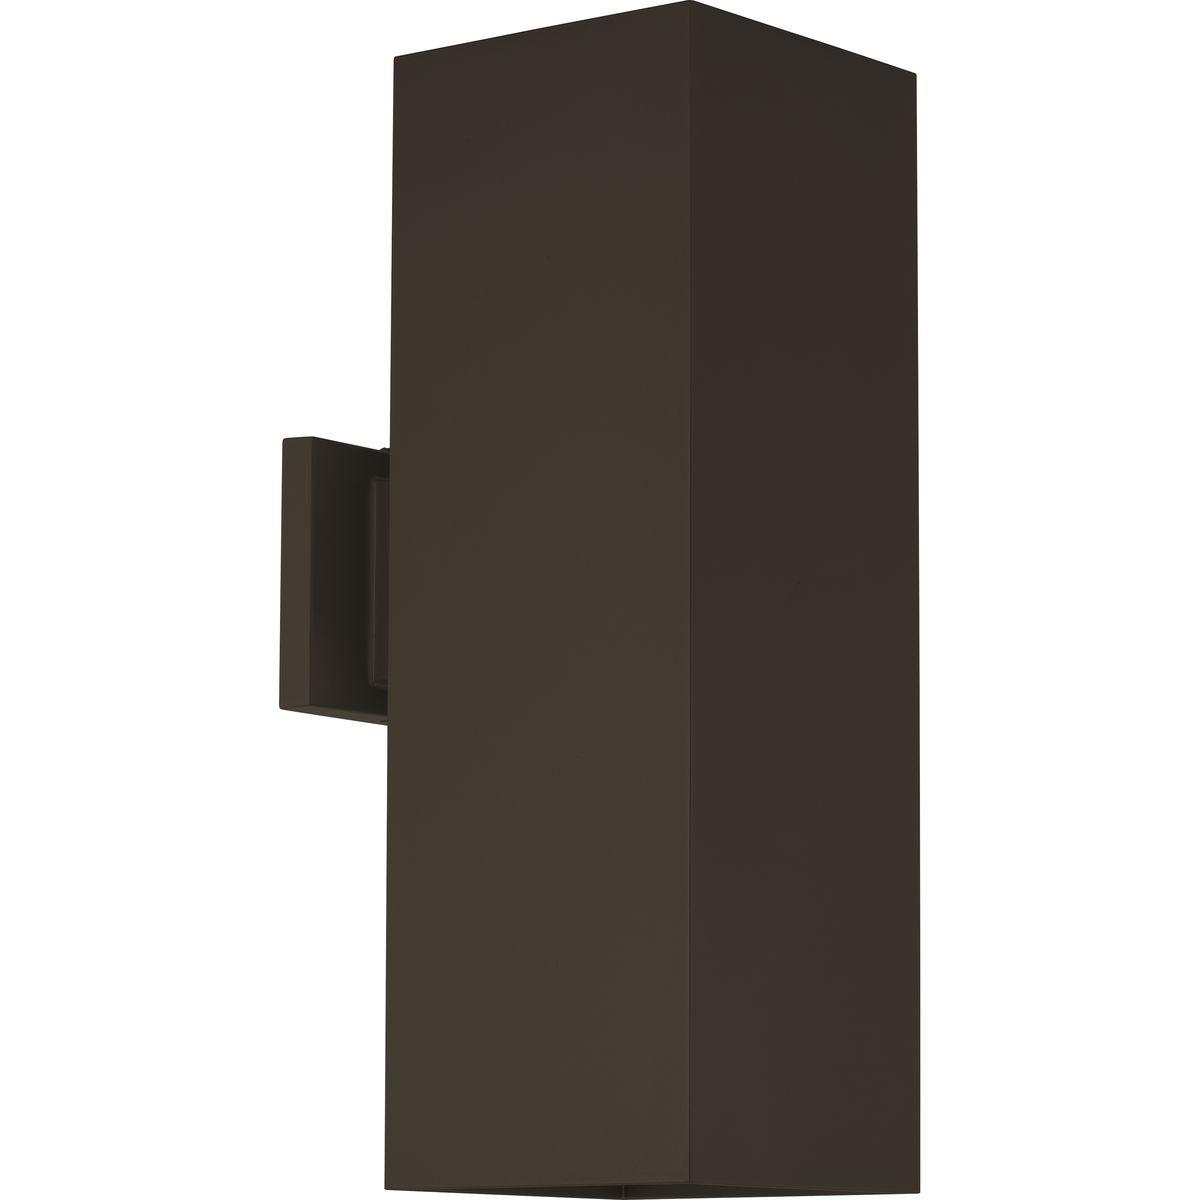 Hubbell P5644-20-30K 6" LED Square Cylinder with heavy-duty aluminum construction, die-cast aluminum wall bracket. UL listed for wet locations. Powder coat for chipping and fading resistance. Antique Bronze finish. Wet location listed when used with P860047 top cover lens (so